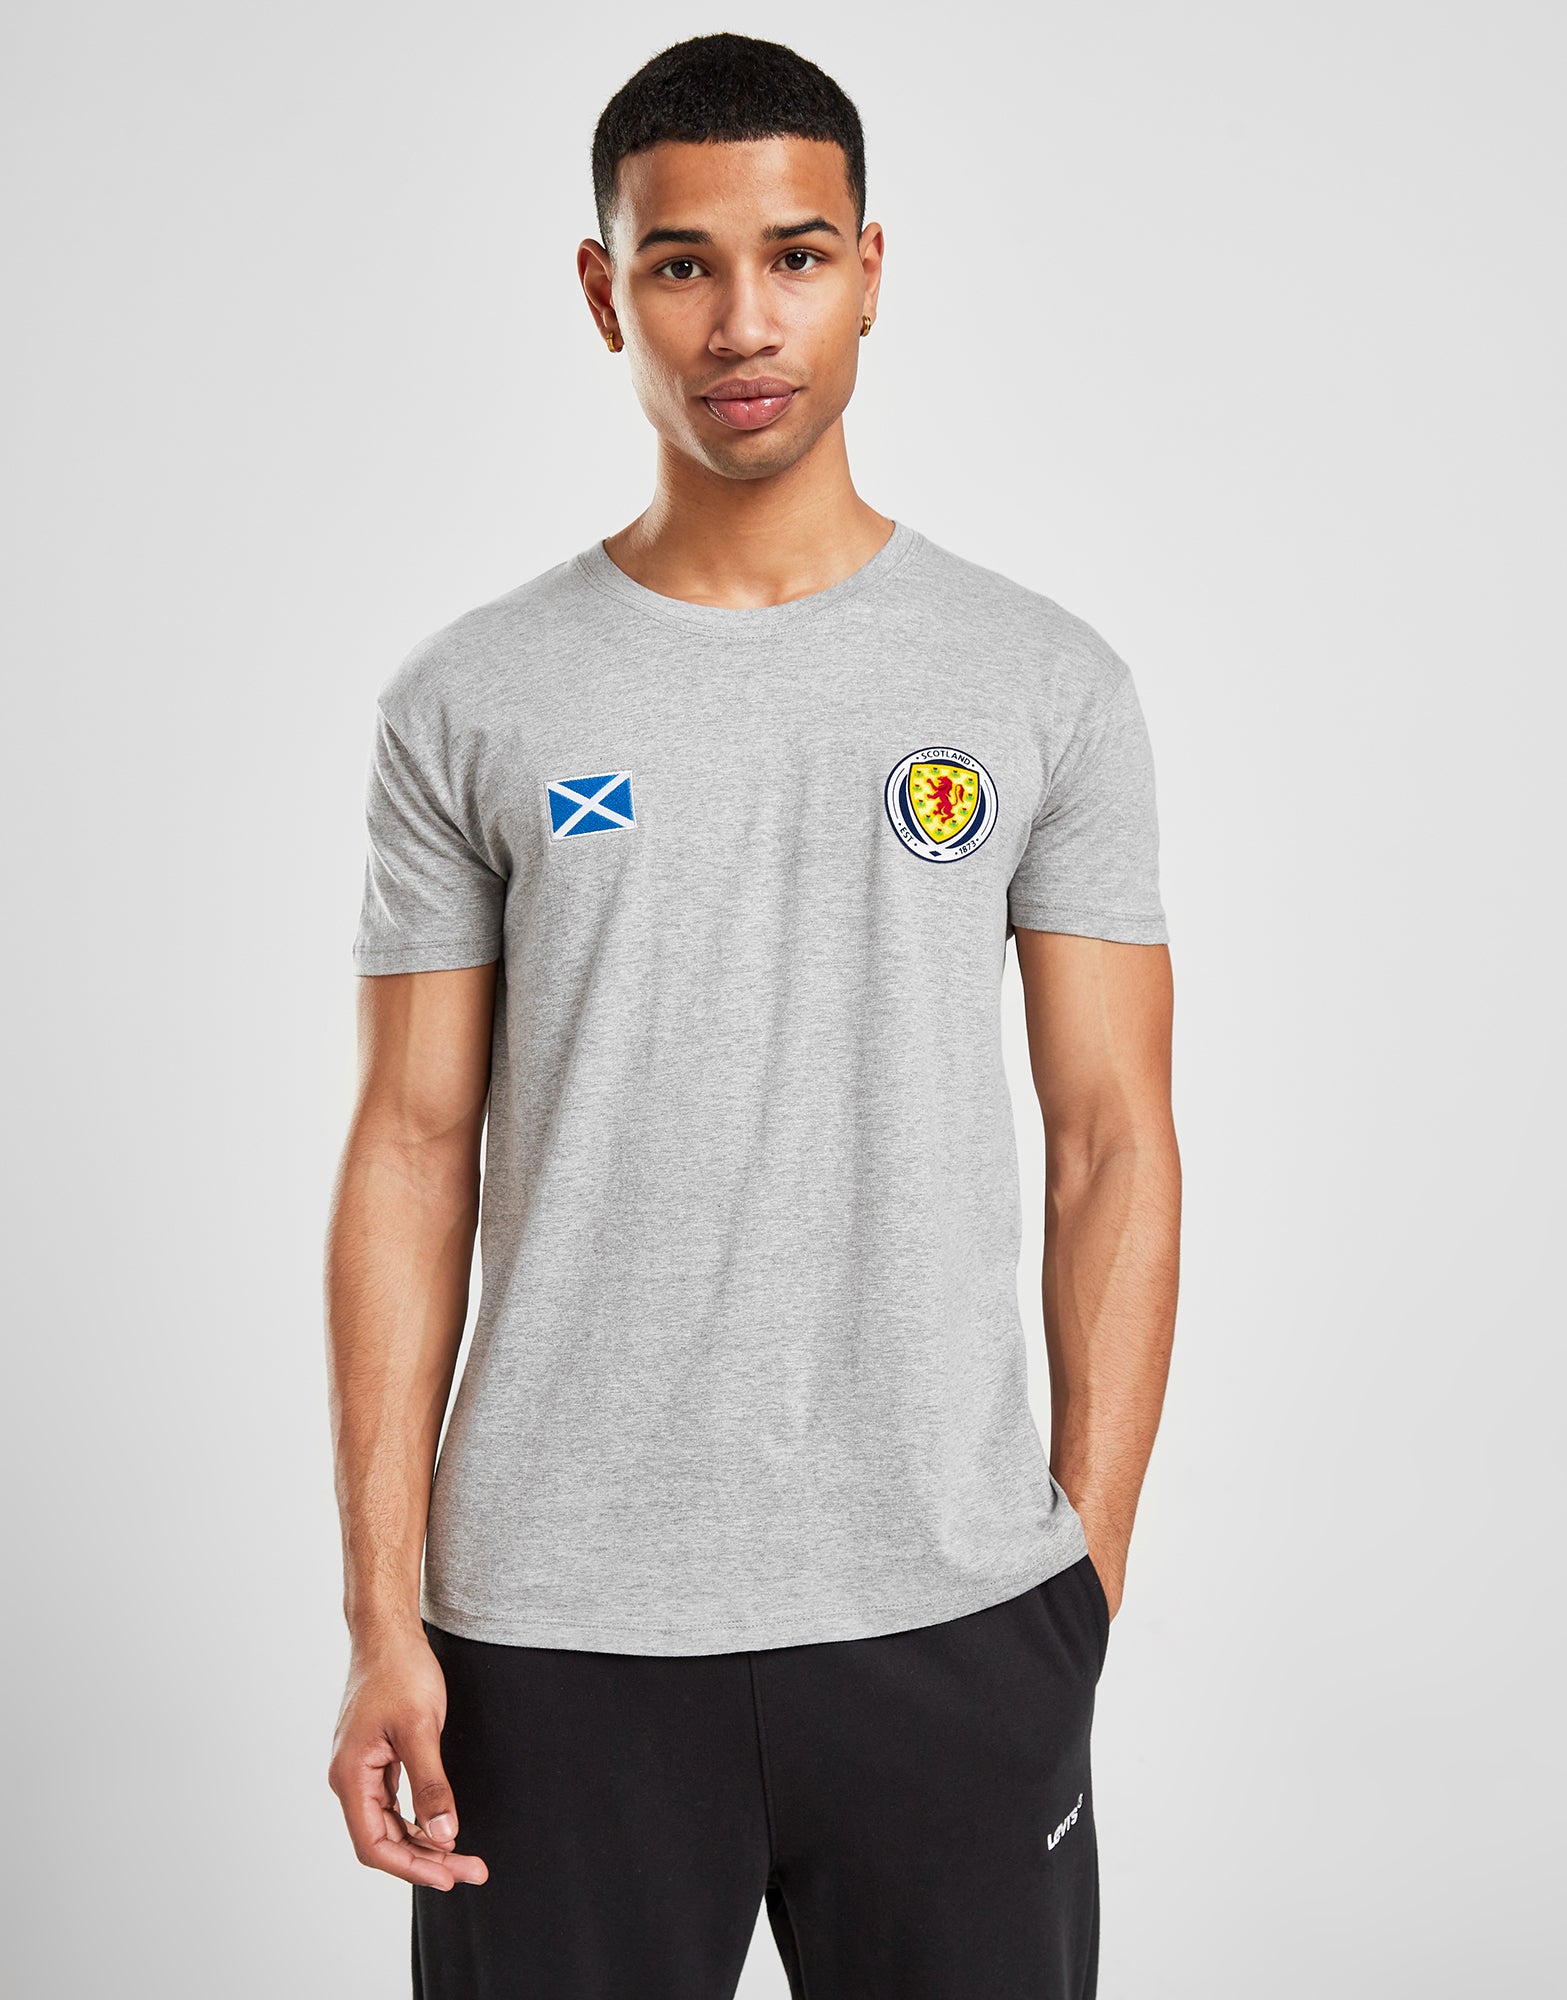 Official Team Scotland Flag and Badge T-Shirt - Grey - The World Football Store